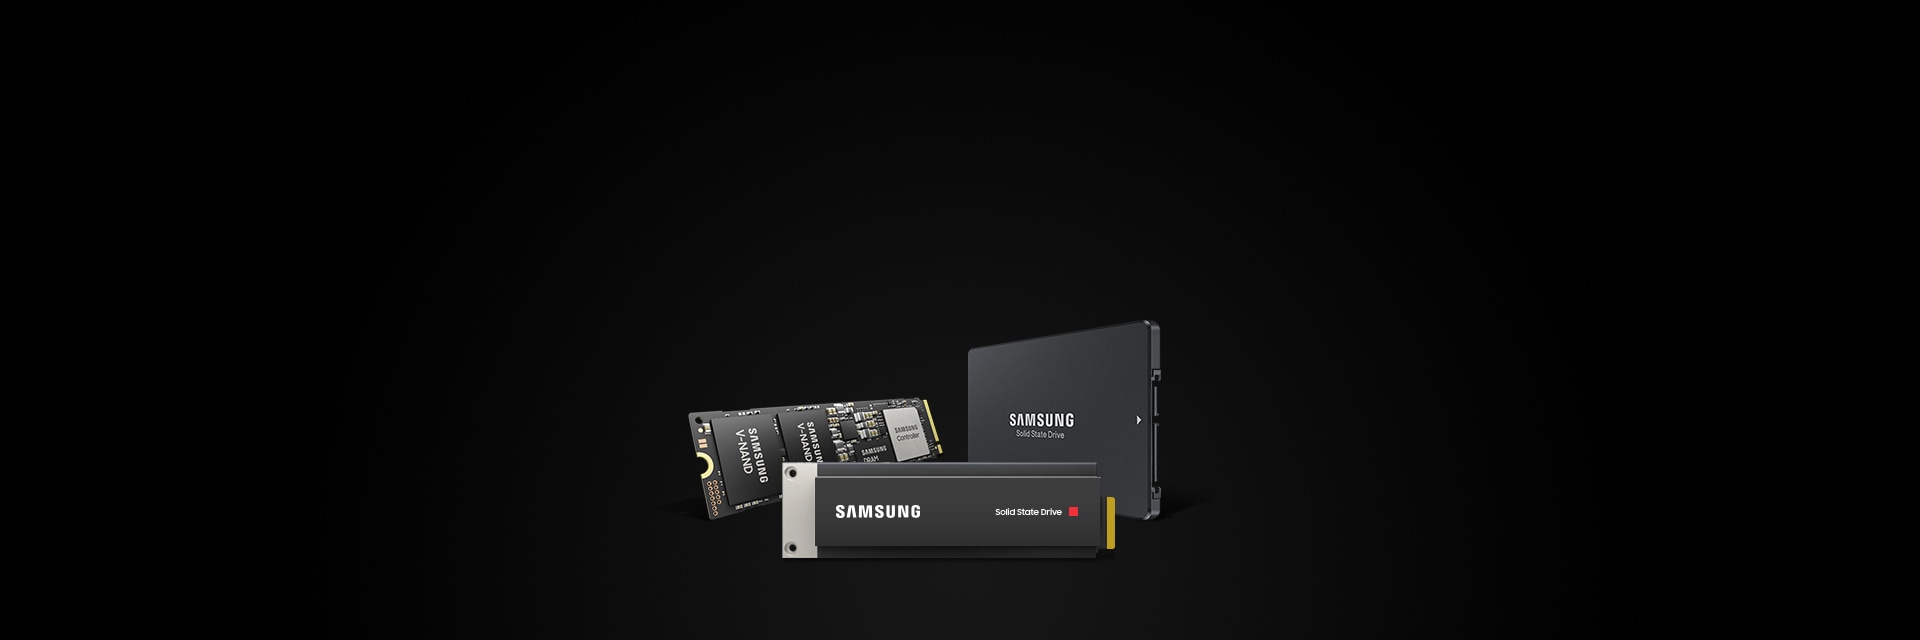 Samsung Semiconductor Datacenter SSD, Optimized for datacenter storage